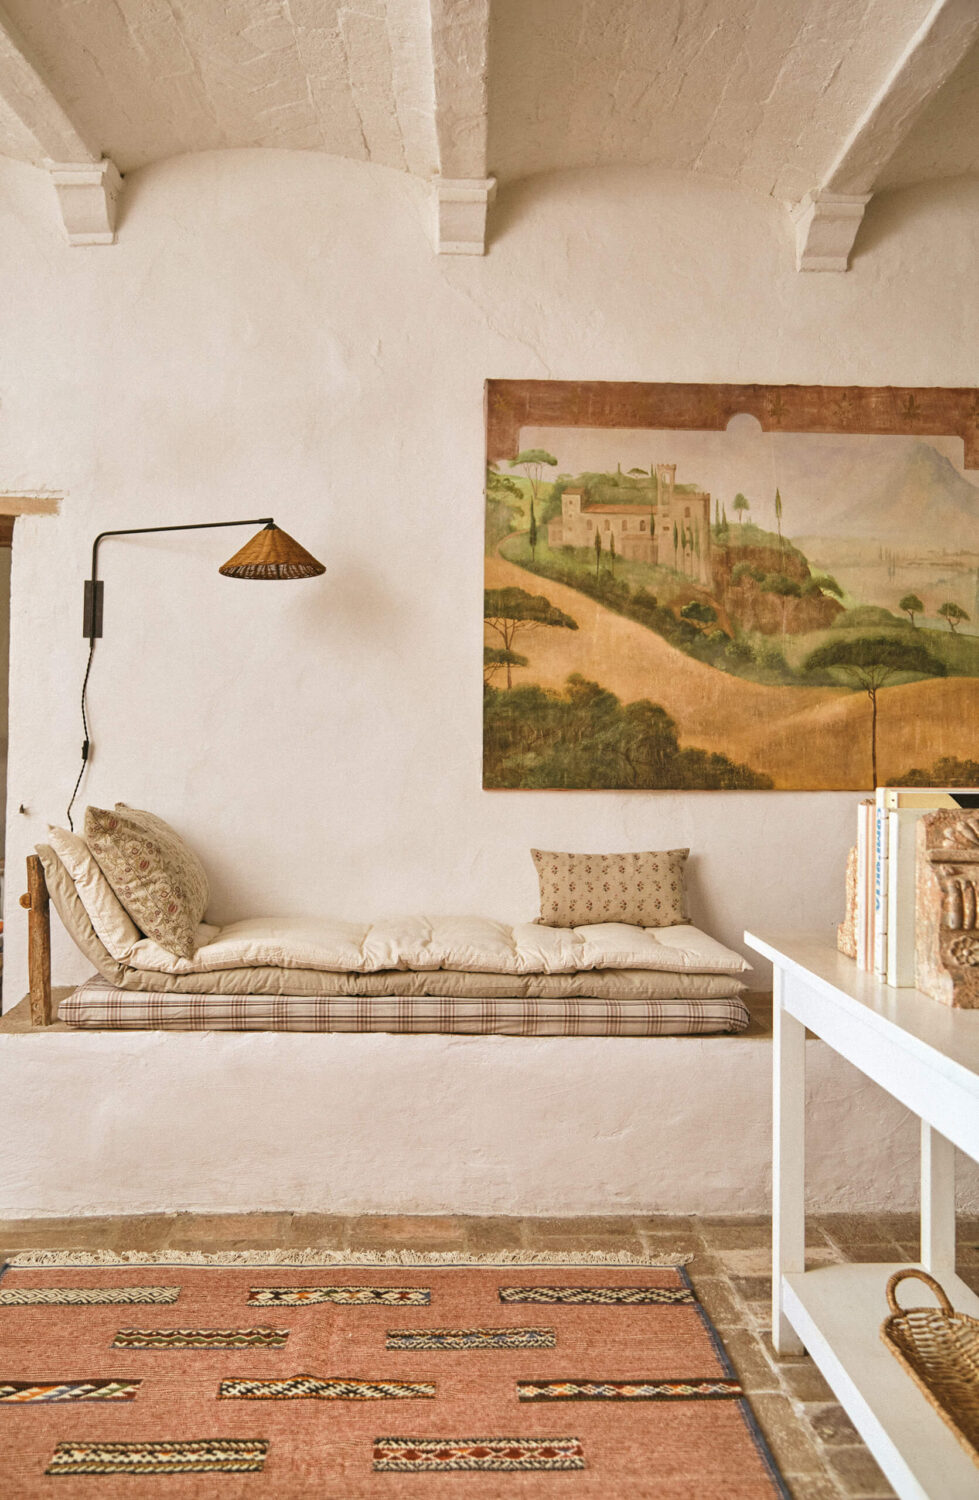 built-in-bench-mediterranean-style-farmhouse-tuscany-nordroom